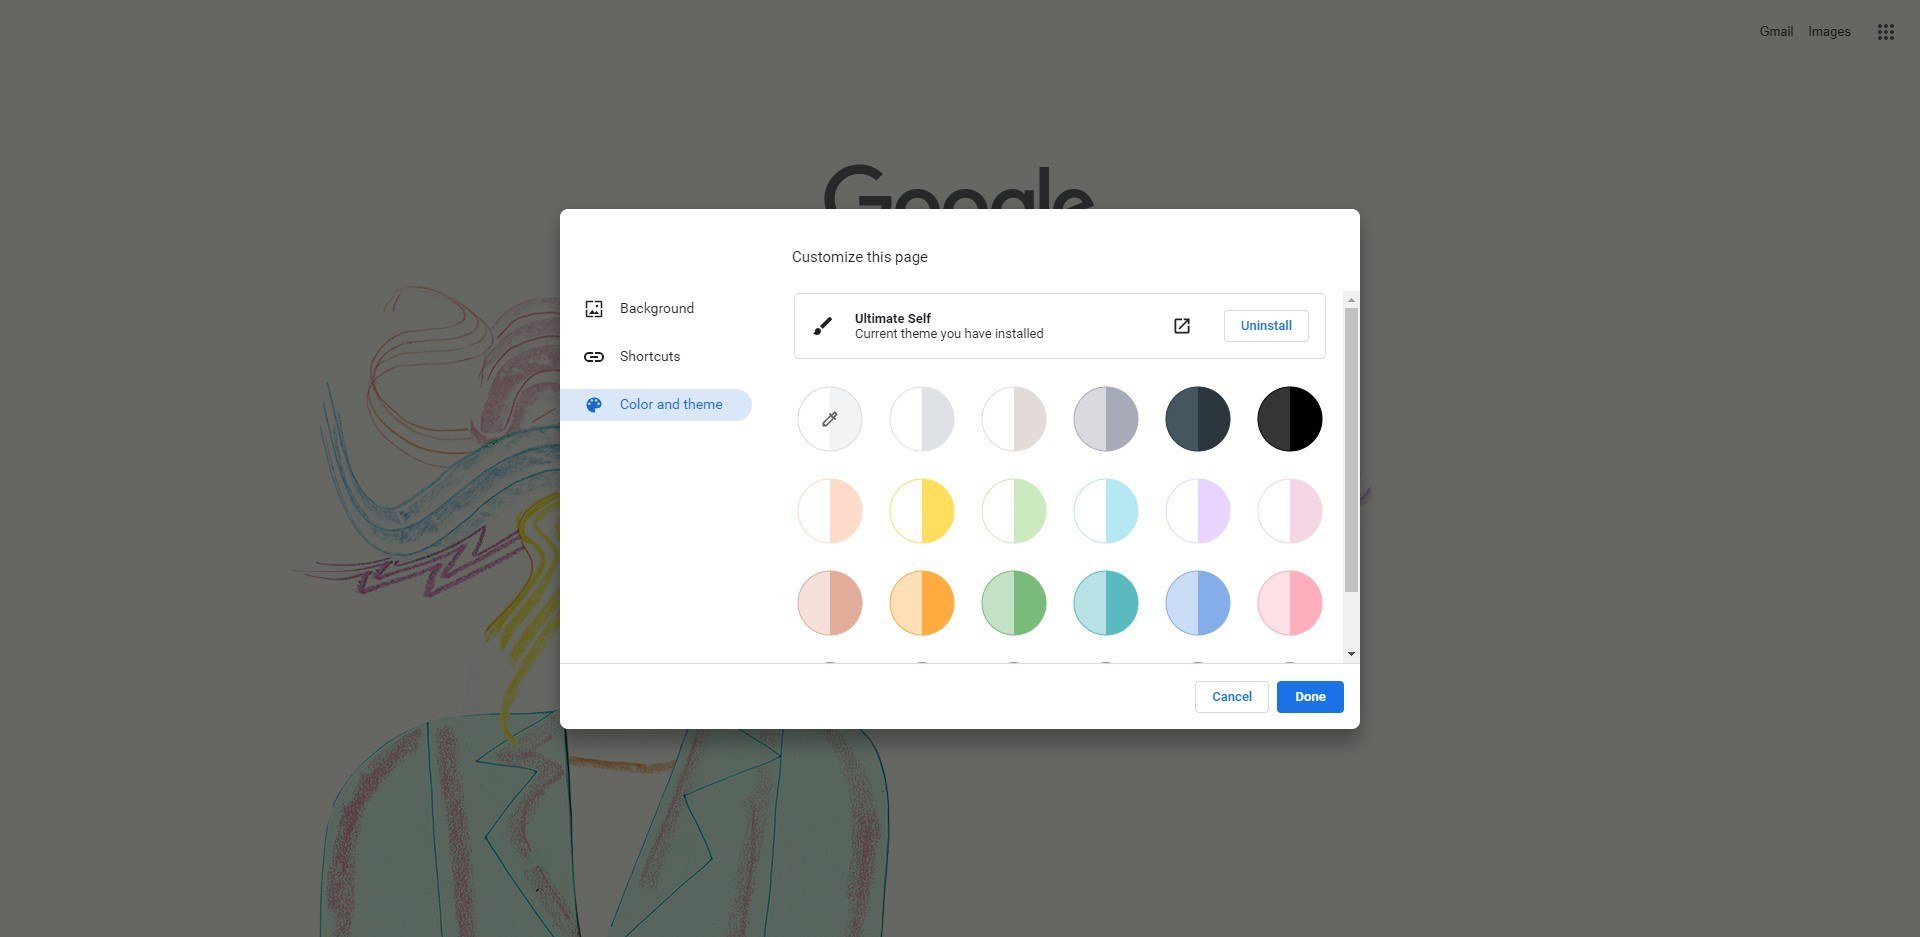 customerize color page of google chrome